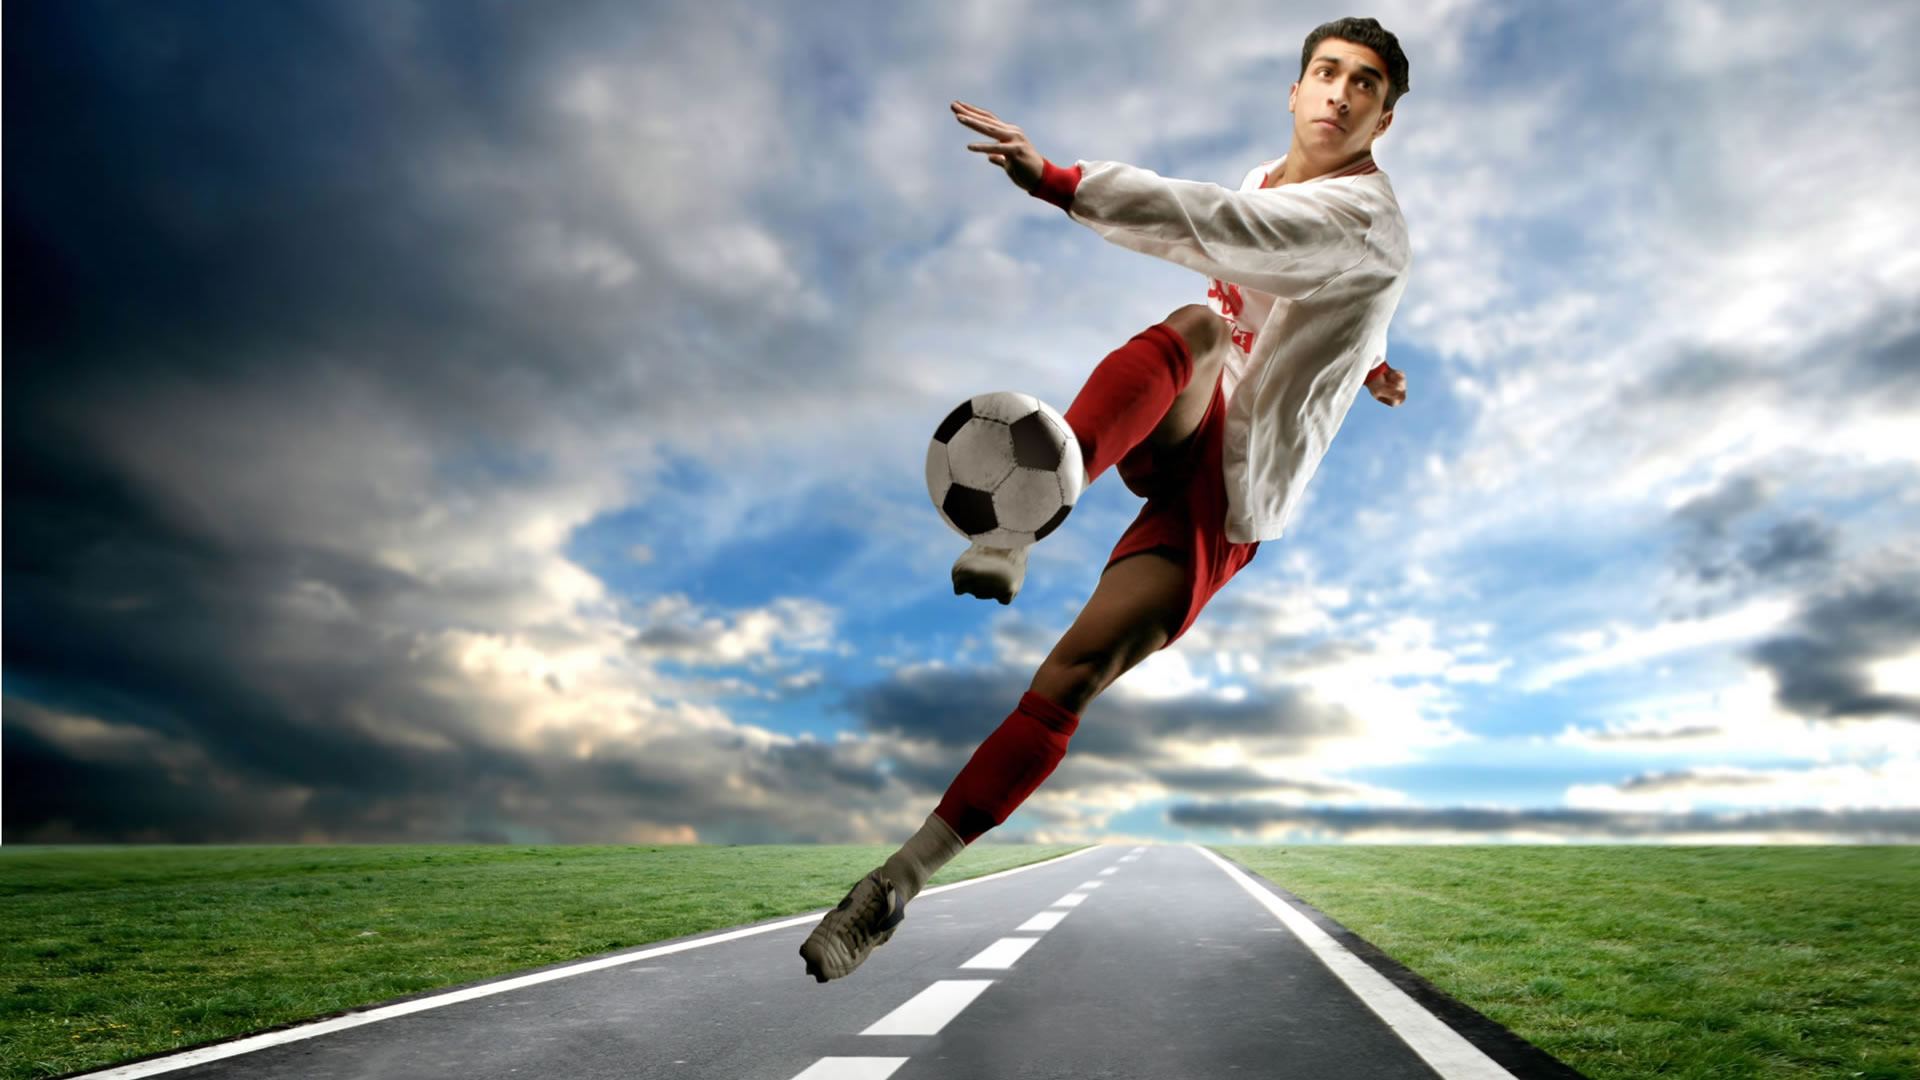 The Road To Victory HD Wallpaper Sport Soccer